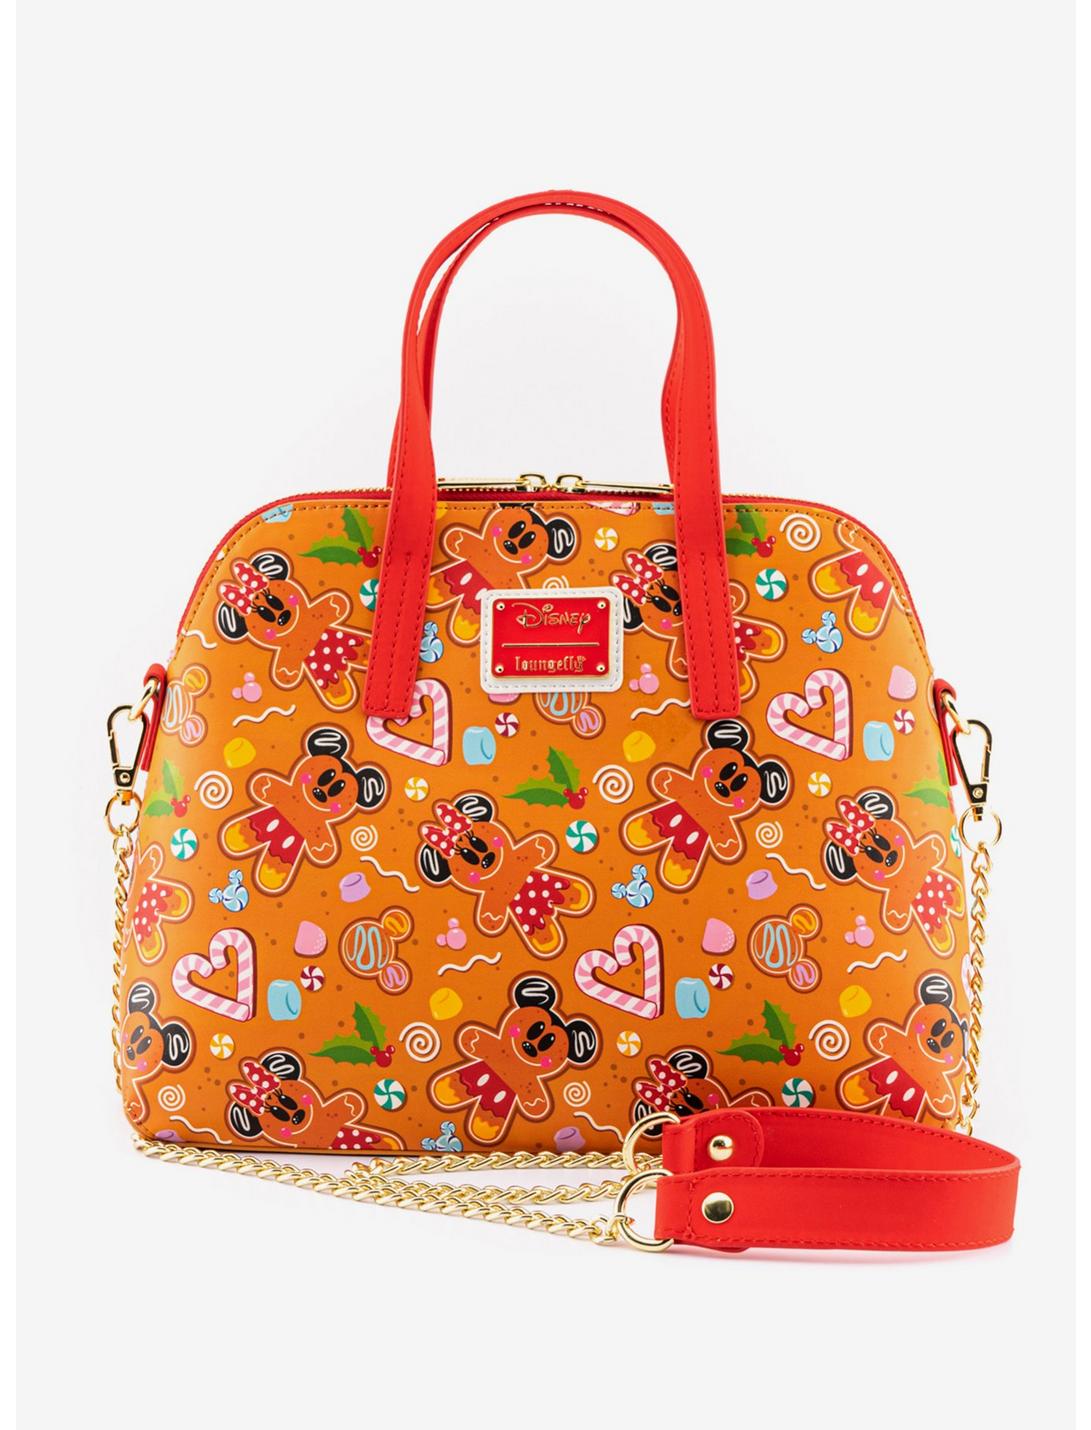 Loungefly Disney Mickey Mouse & Minnie Mouse Gingerbread Satchel Bag, , hi-res